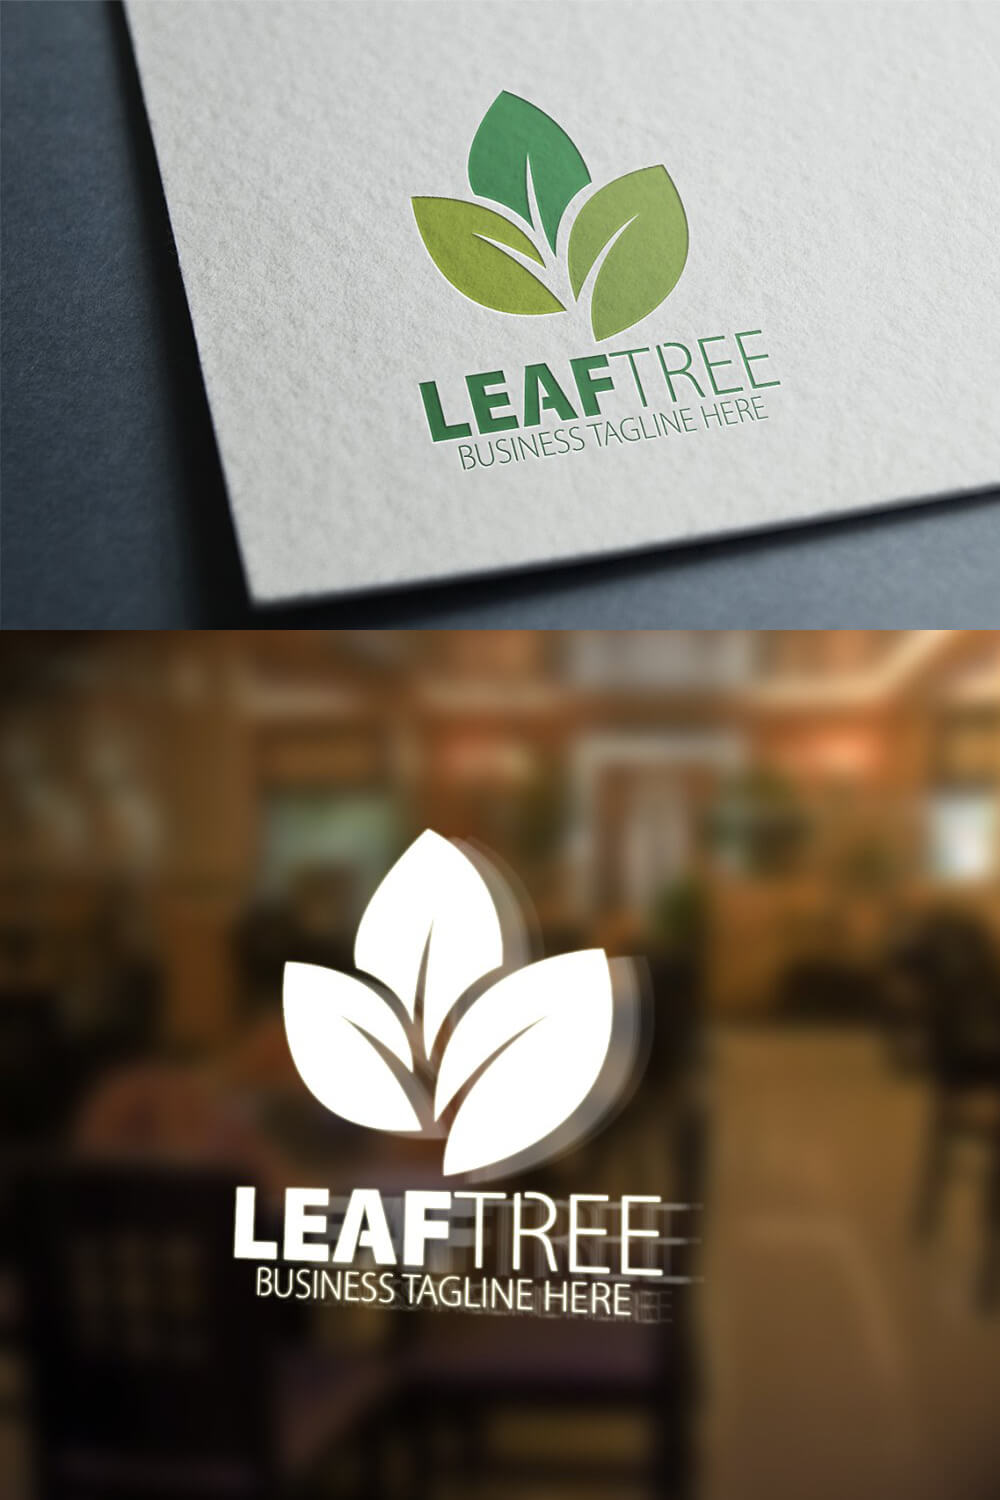 Green leaf tree logo on light gray paper and white logo on tinted glass.